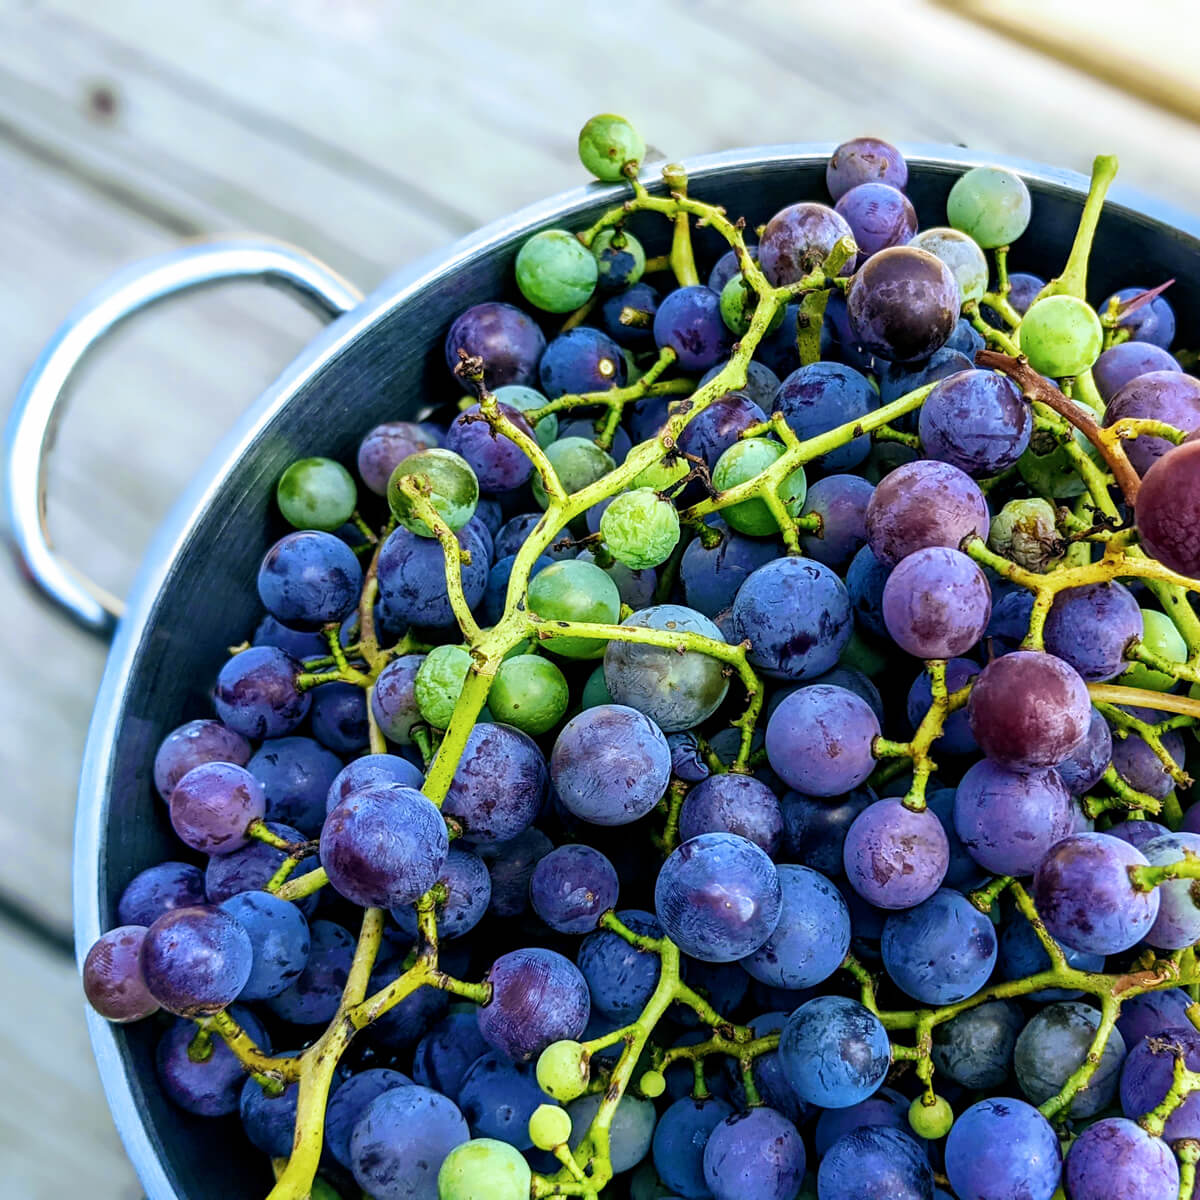 Concord Grapes in a Metal Colander on a Wood Deck